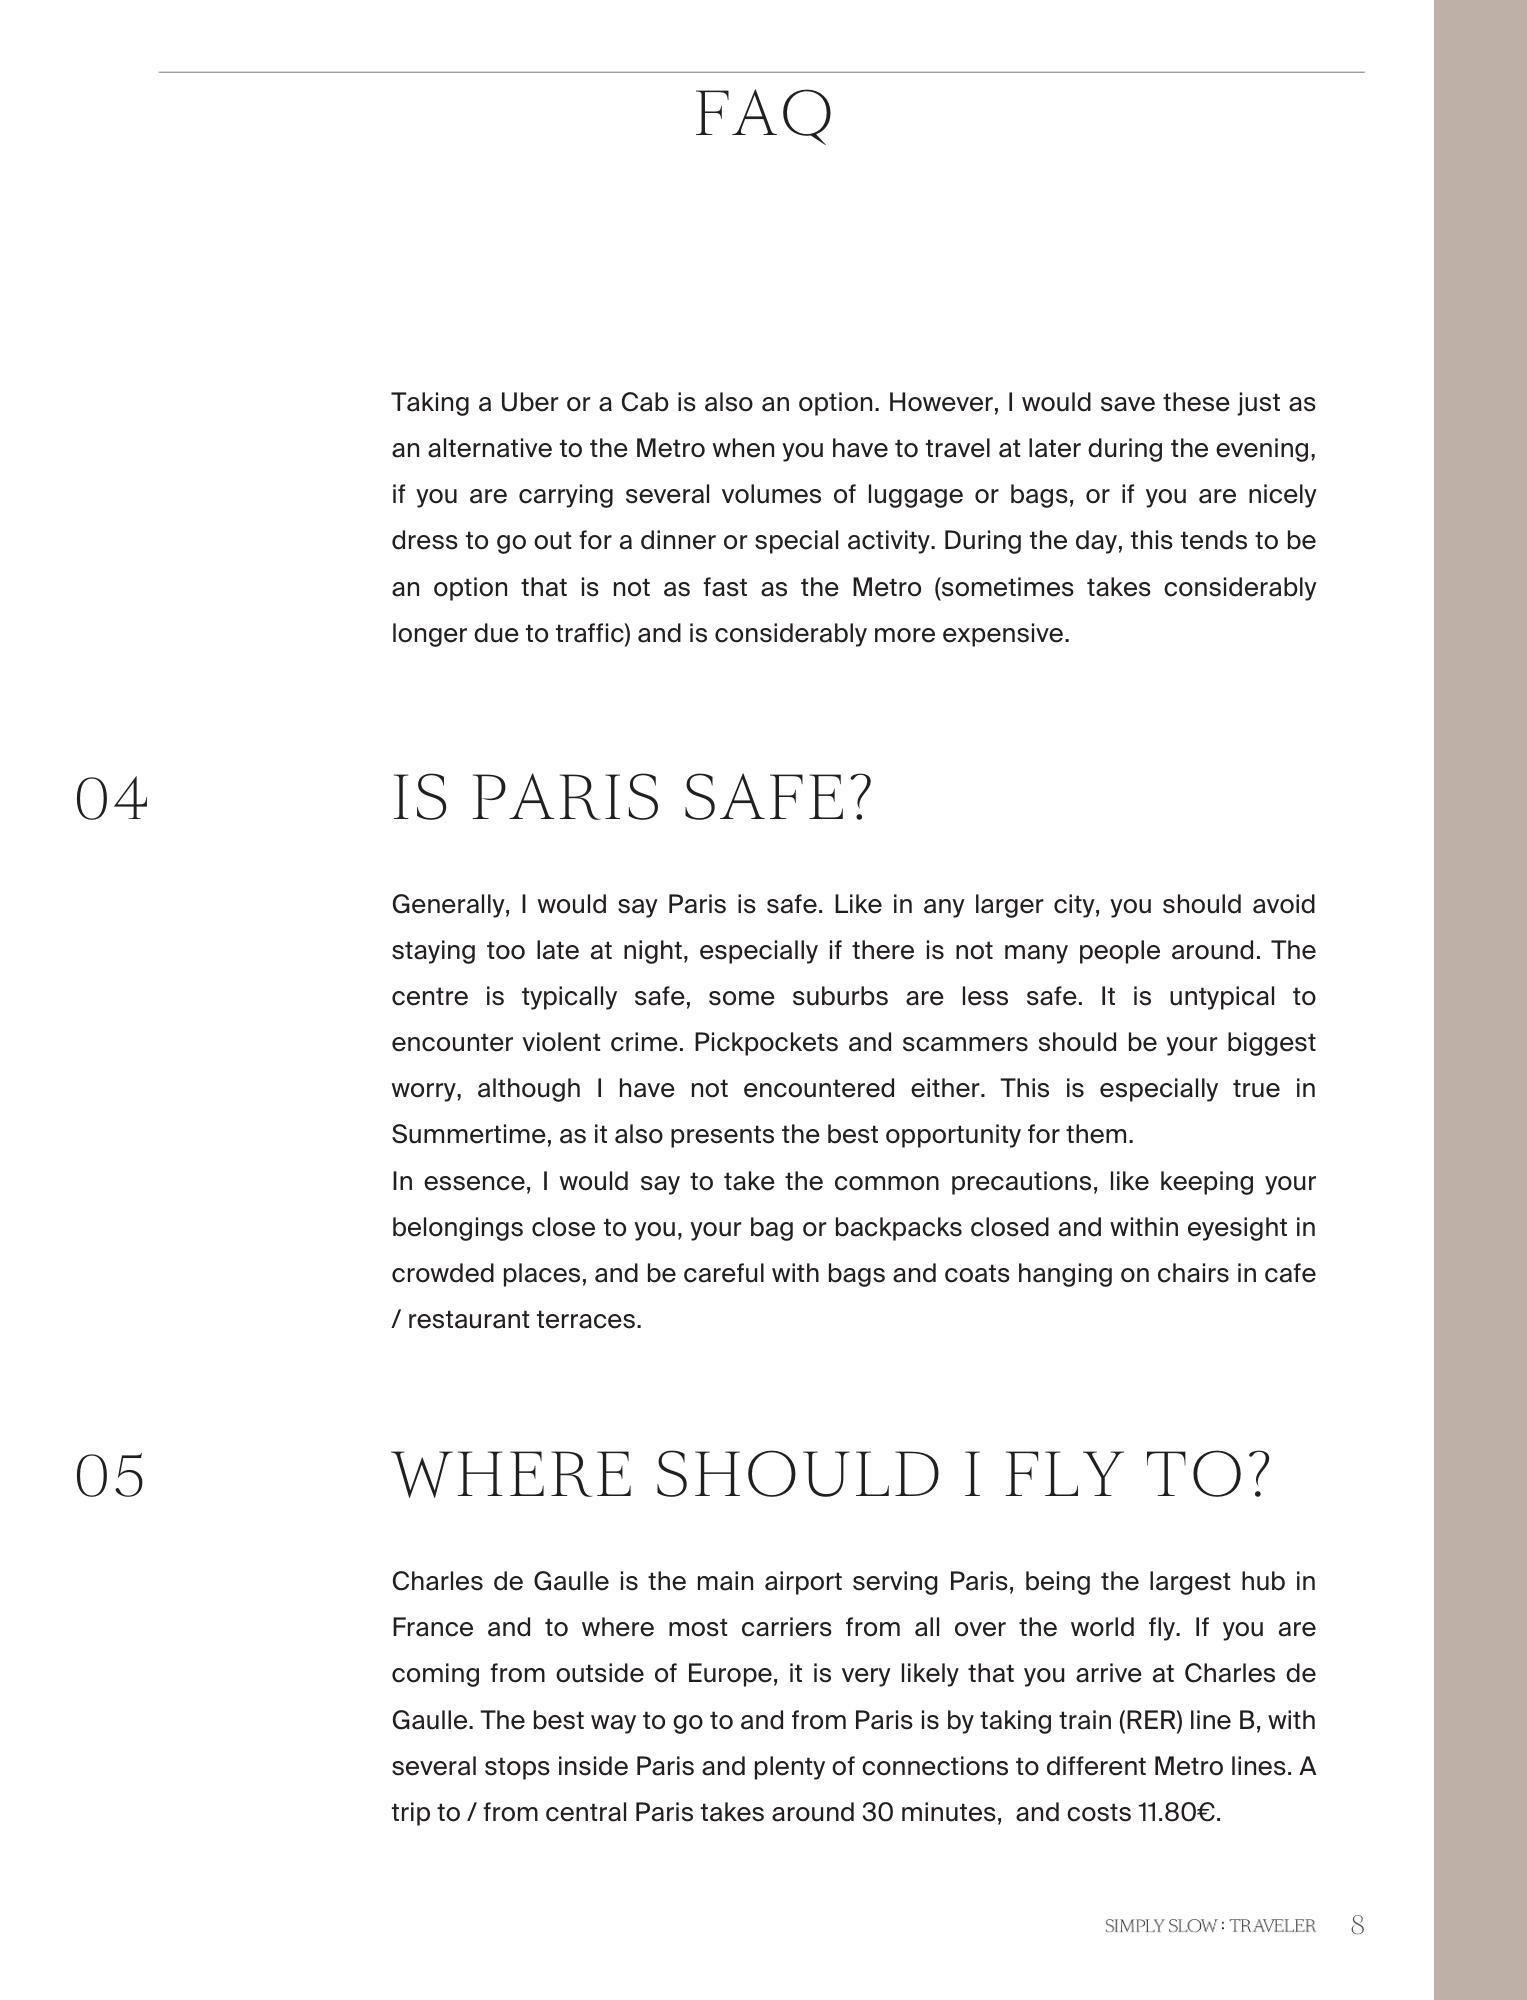 A Guide to Paris - Page with FAQs, by Simply Slow Traveler